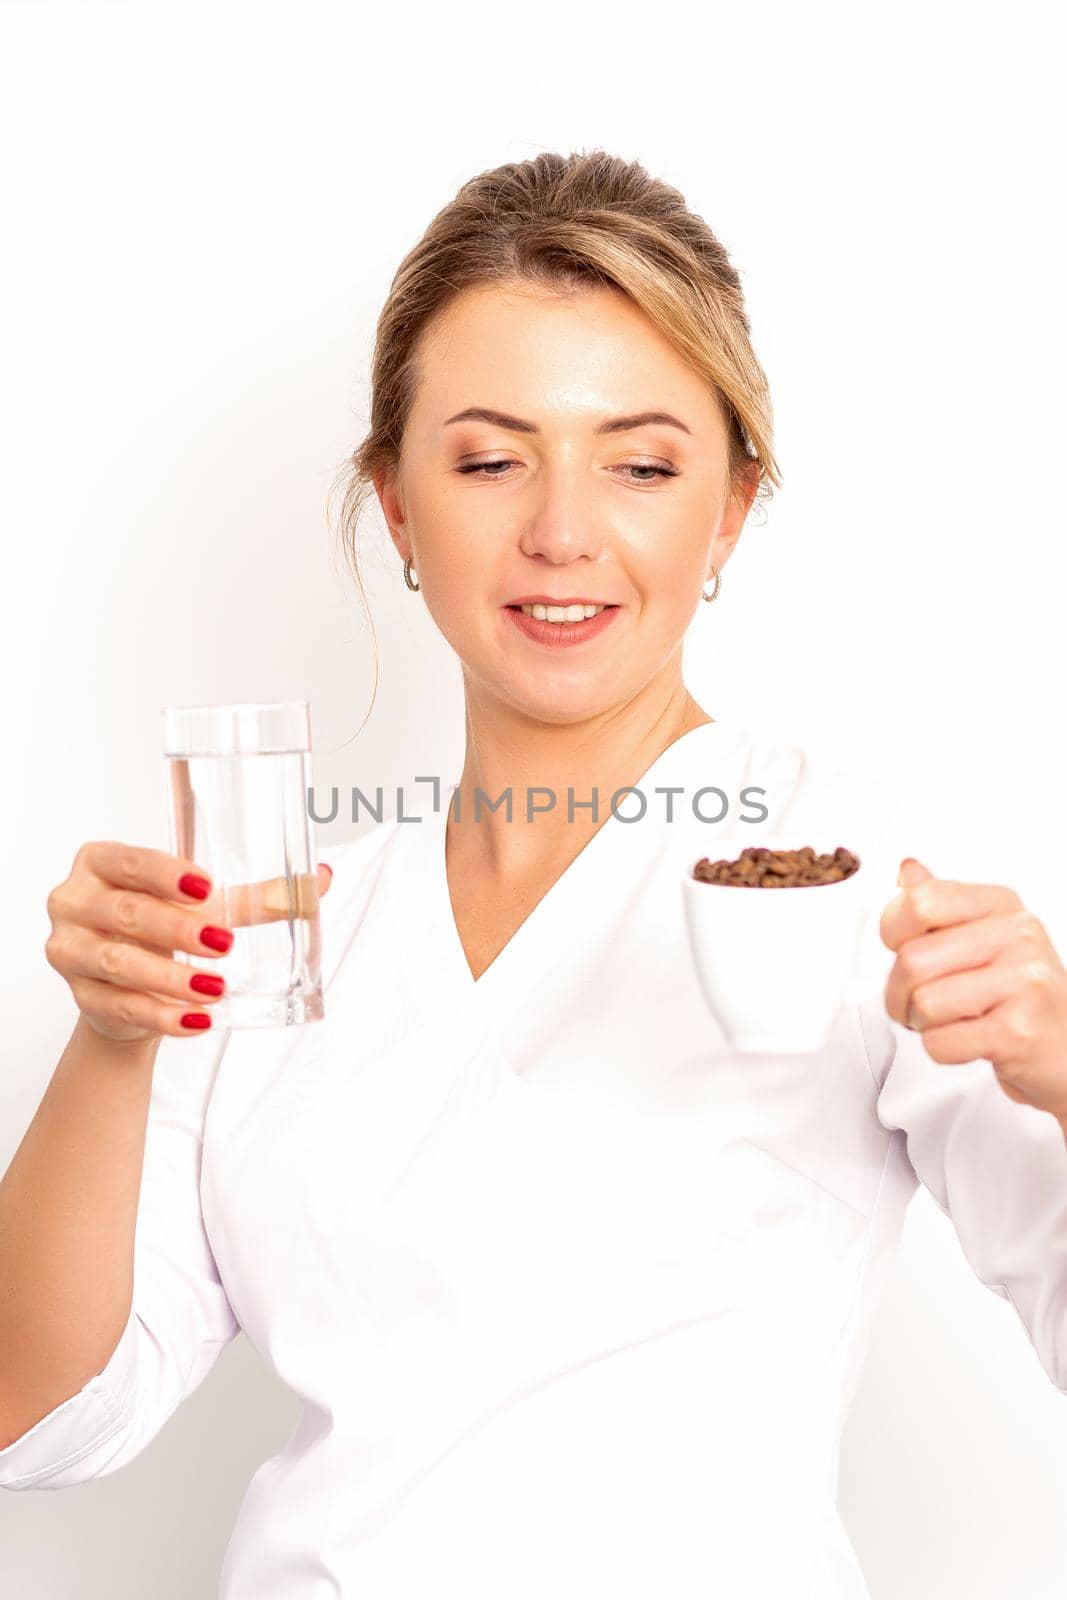 Coffee with water. The female nutritionist holds a cup of coffee beans and a glass of water in her hands on white background. by okskukuruza